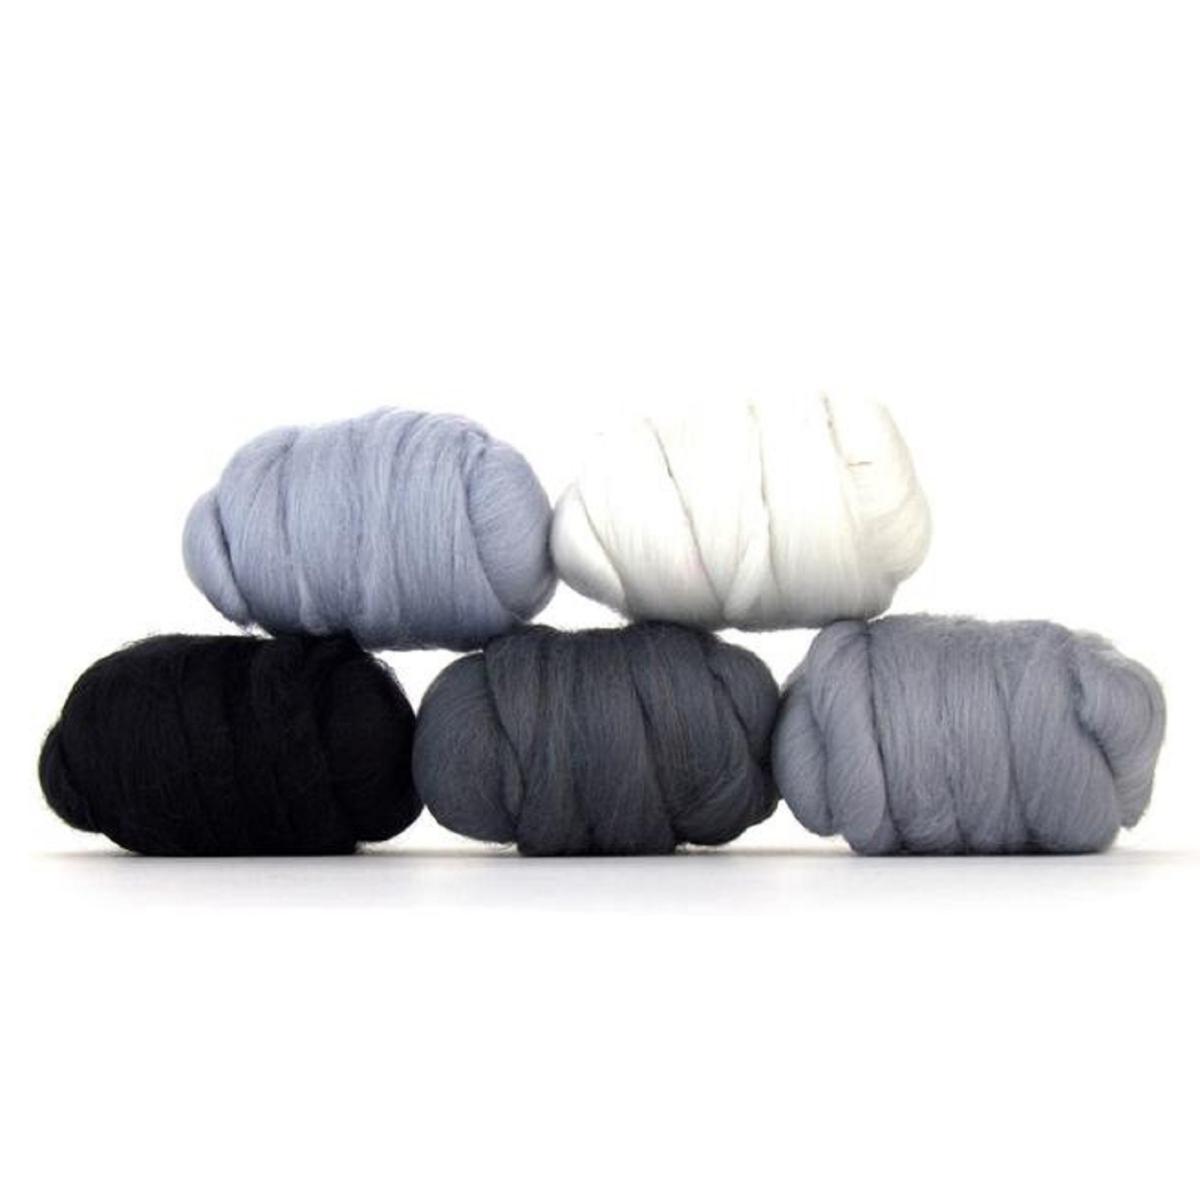 Mixed Merino Wool Variety Pack | Hazy Gray (Grays) 250 Grams, 23 Micron - Textile Indie 